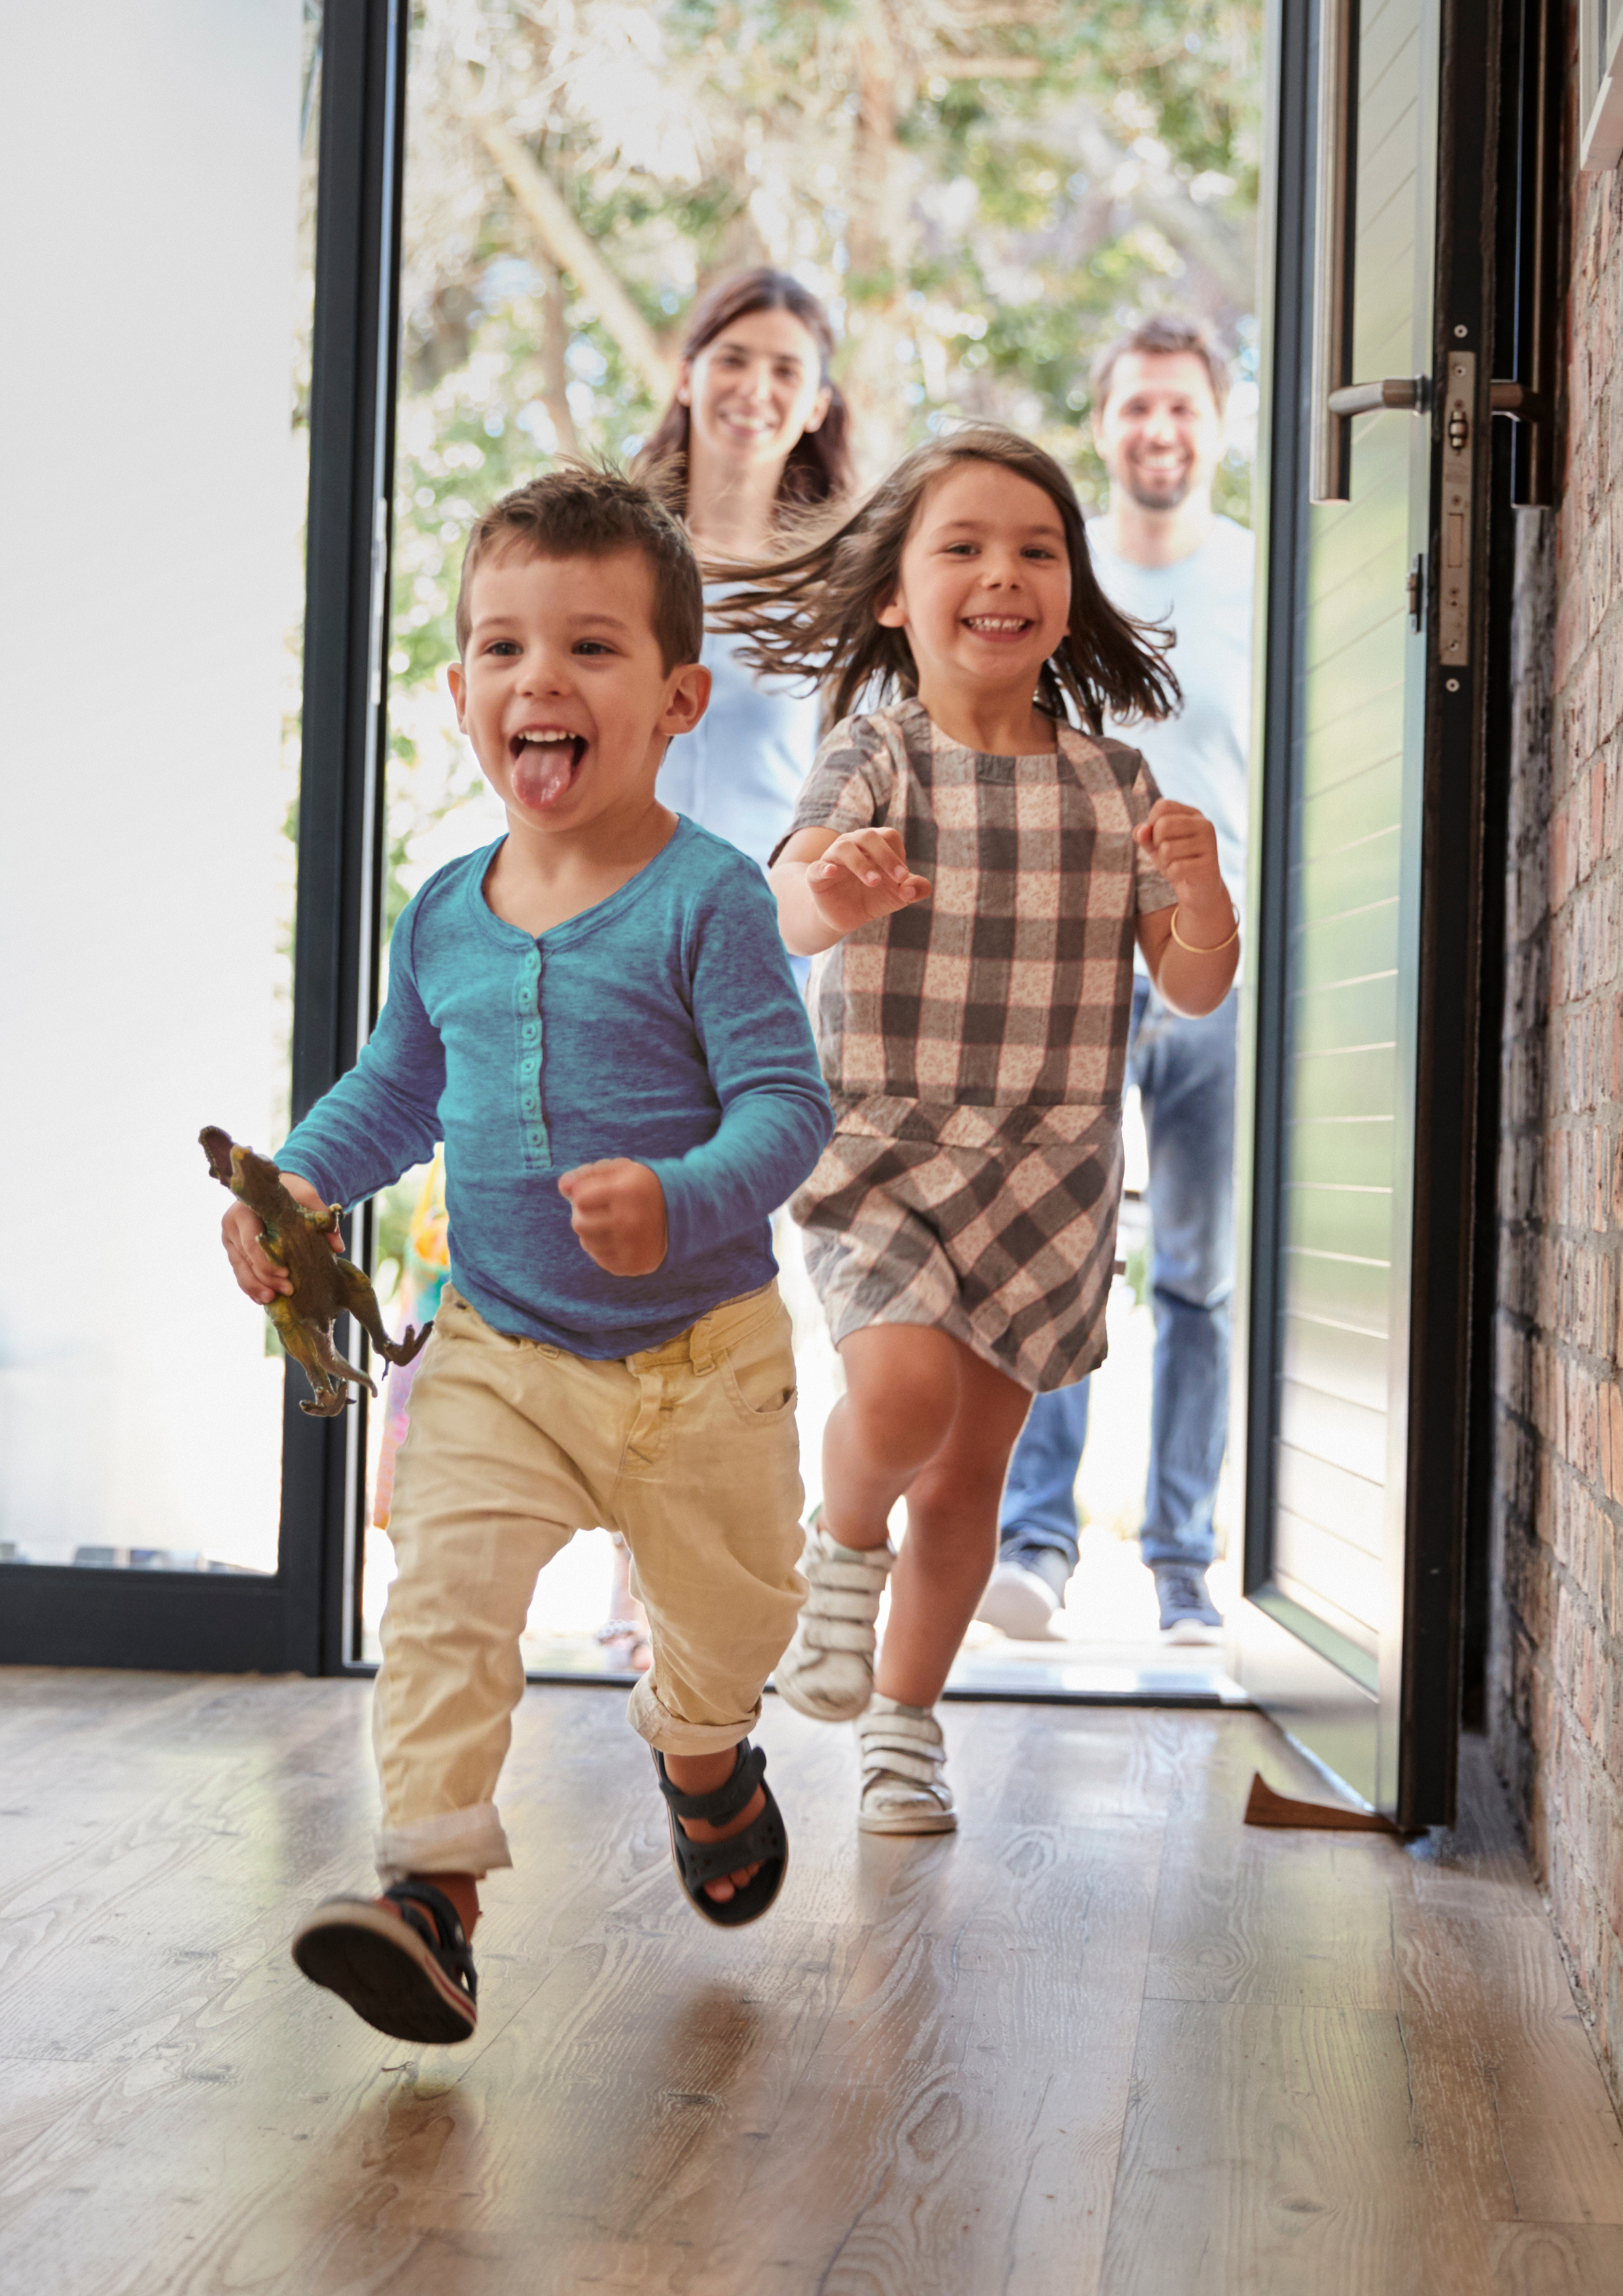 Two young children smiling and running into house, parents walking through doorway behind them